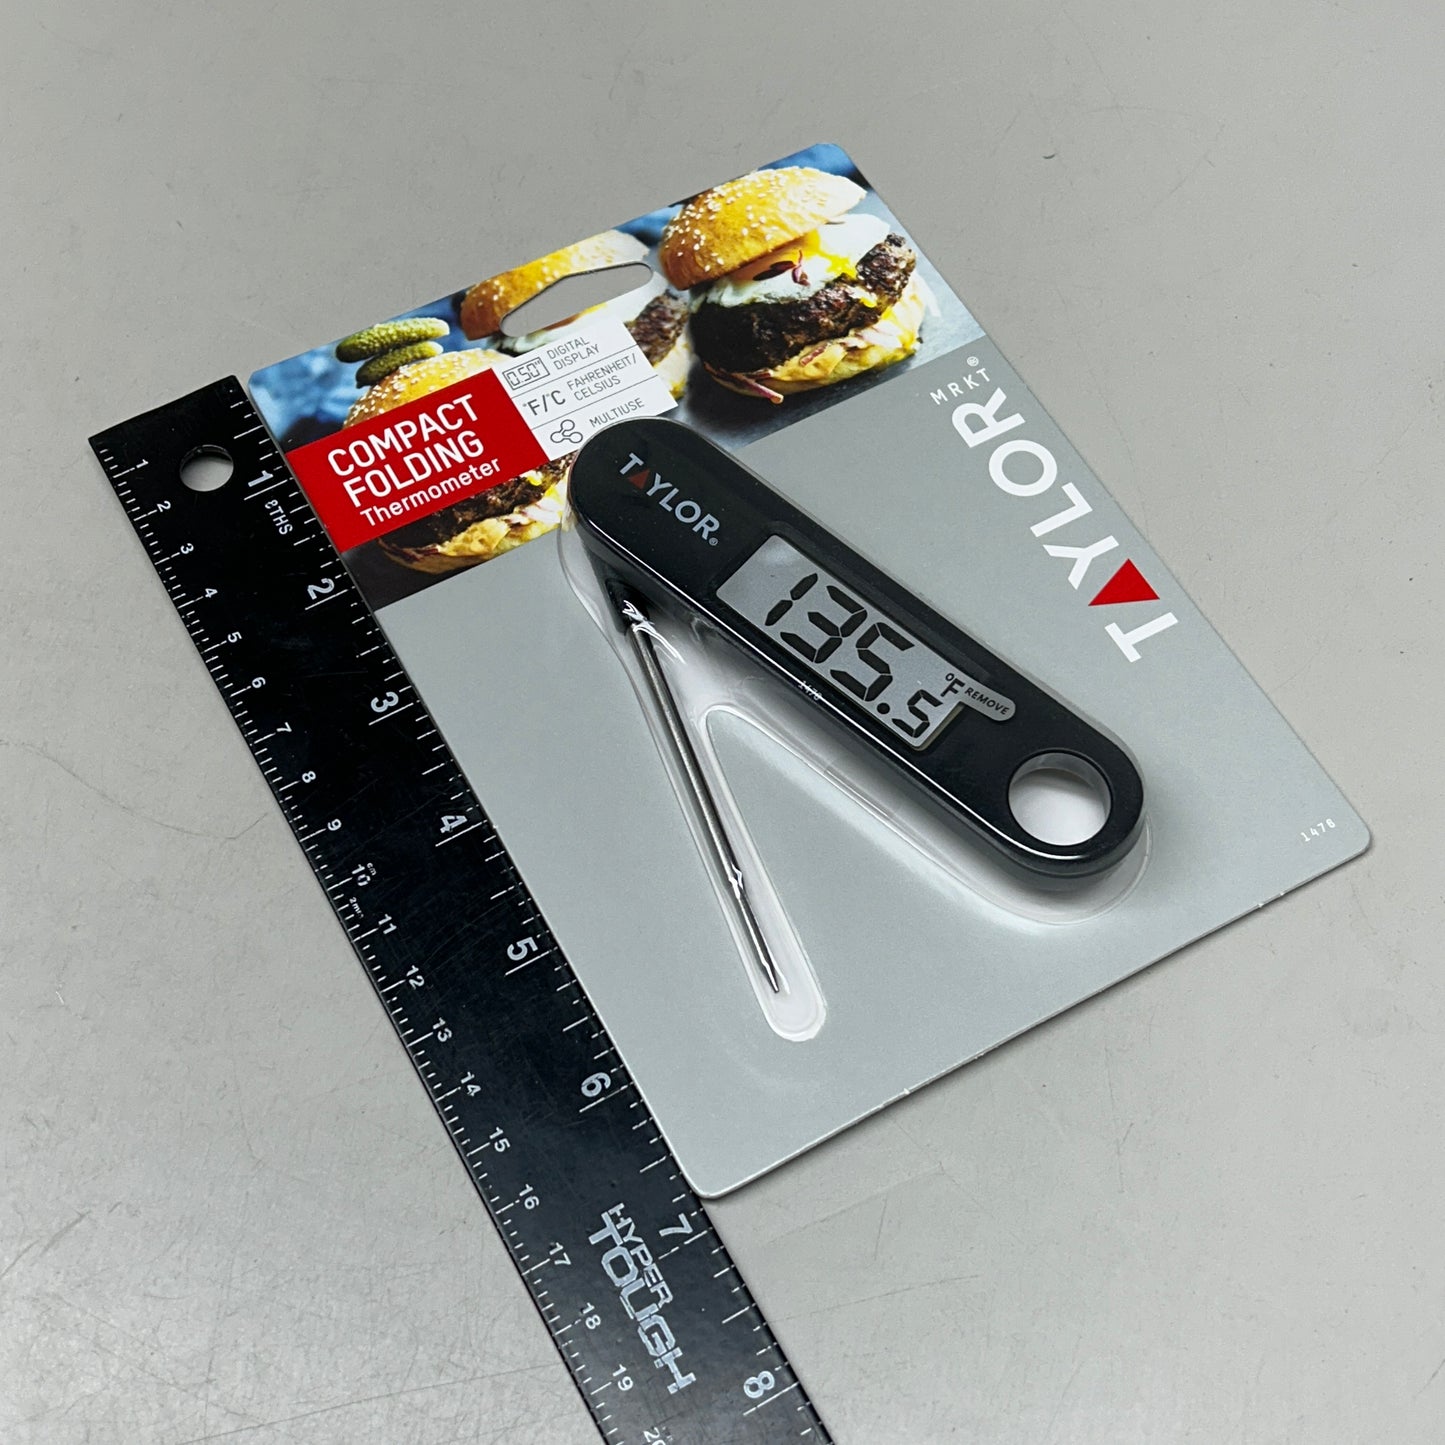 TAYLOR Compact Folding Thermometer Fahrenheit/Celsius Black (New)